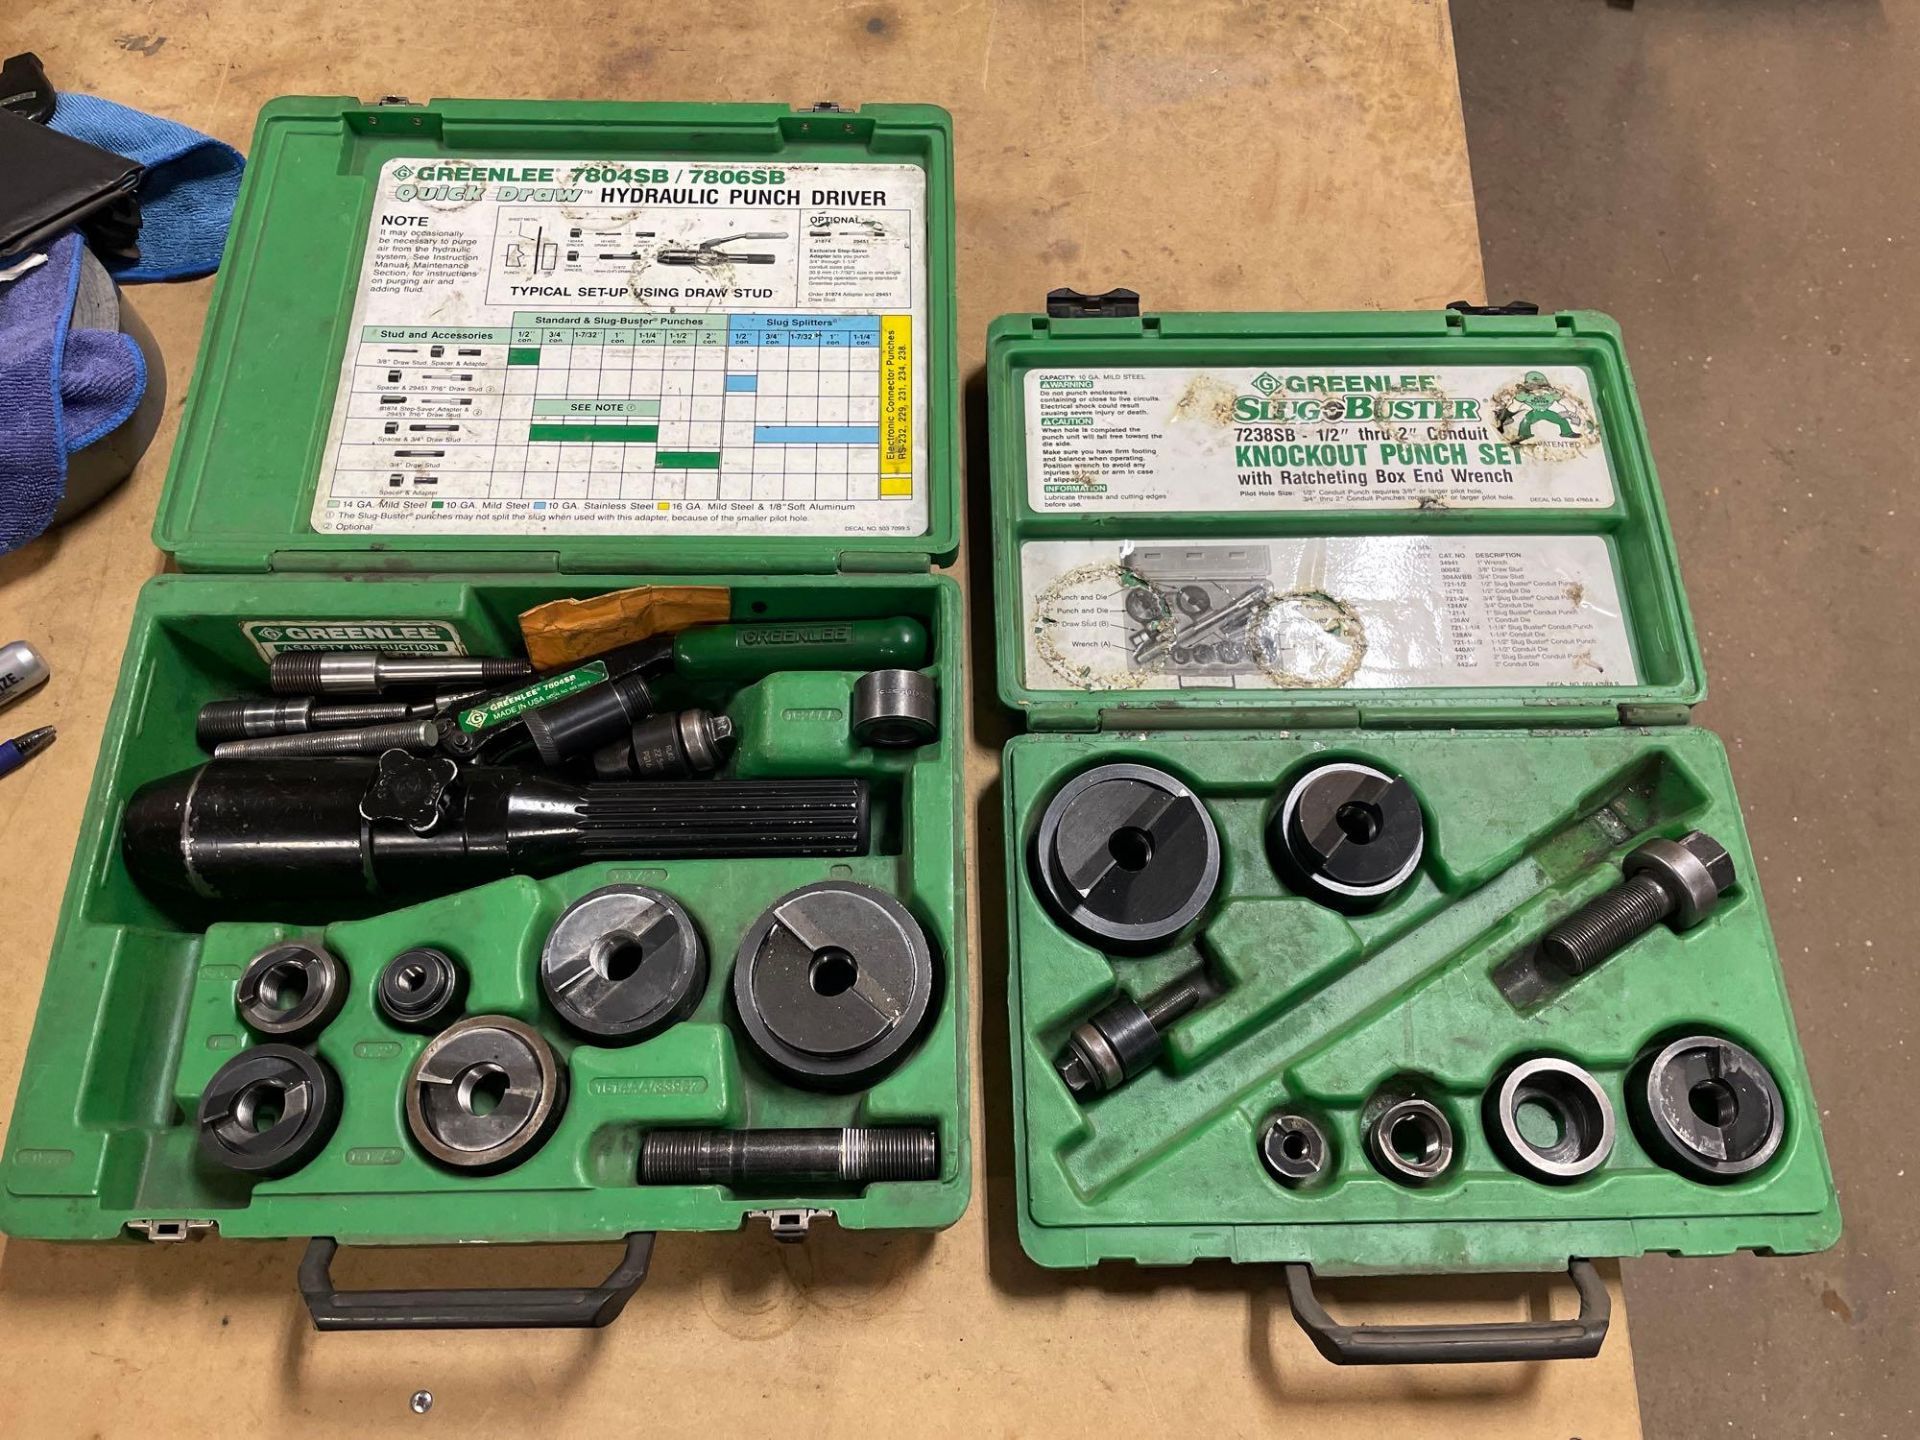 Greenlee Hydraulic Punch Driver/Knockout Punch Kits